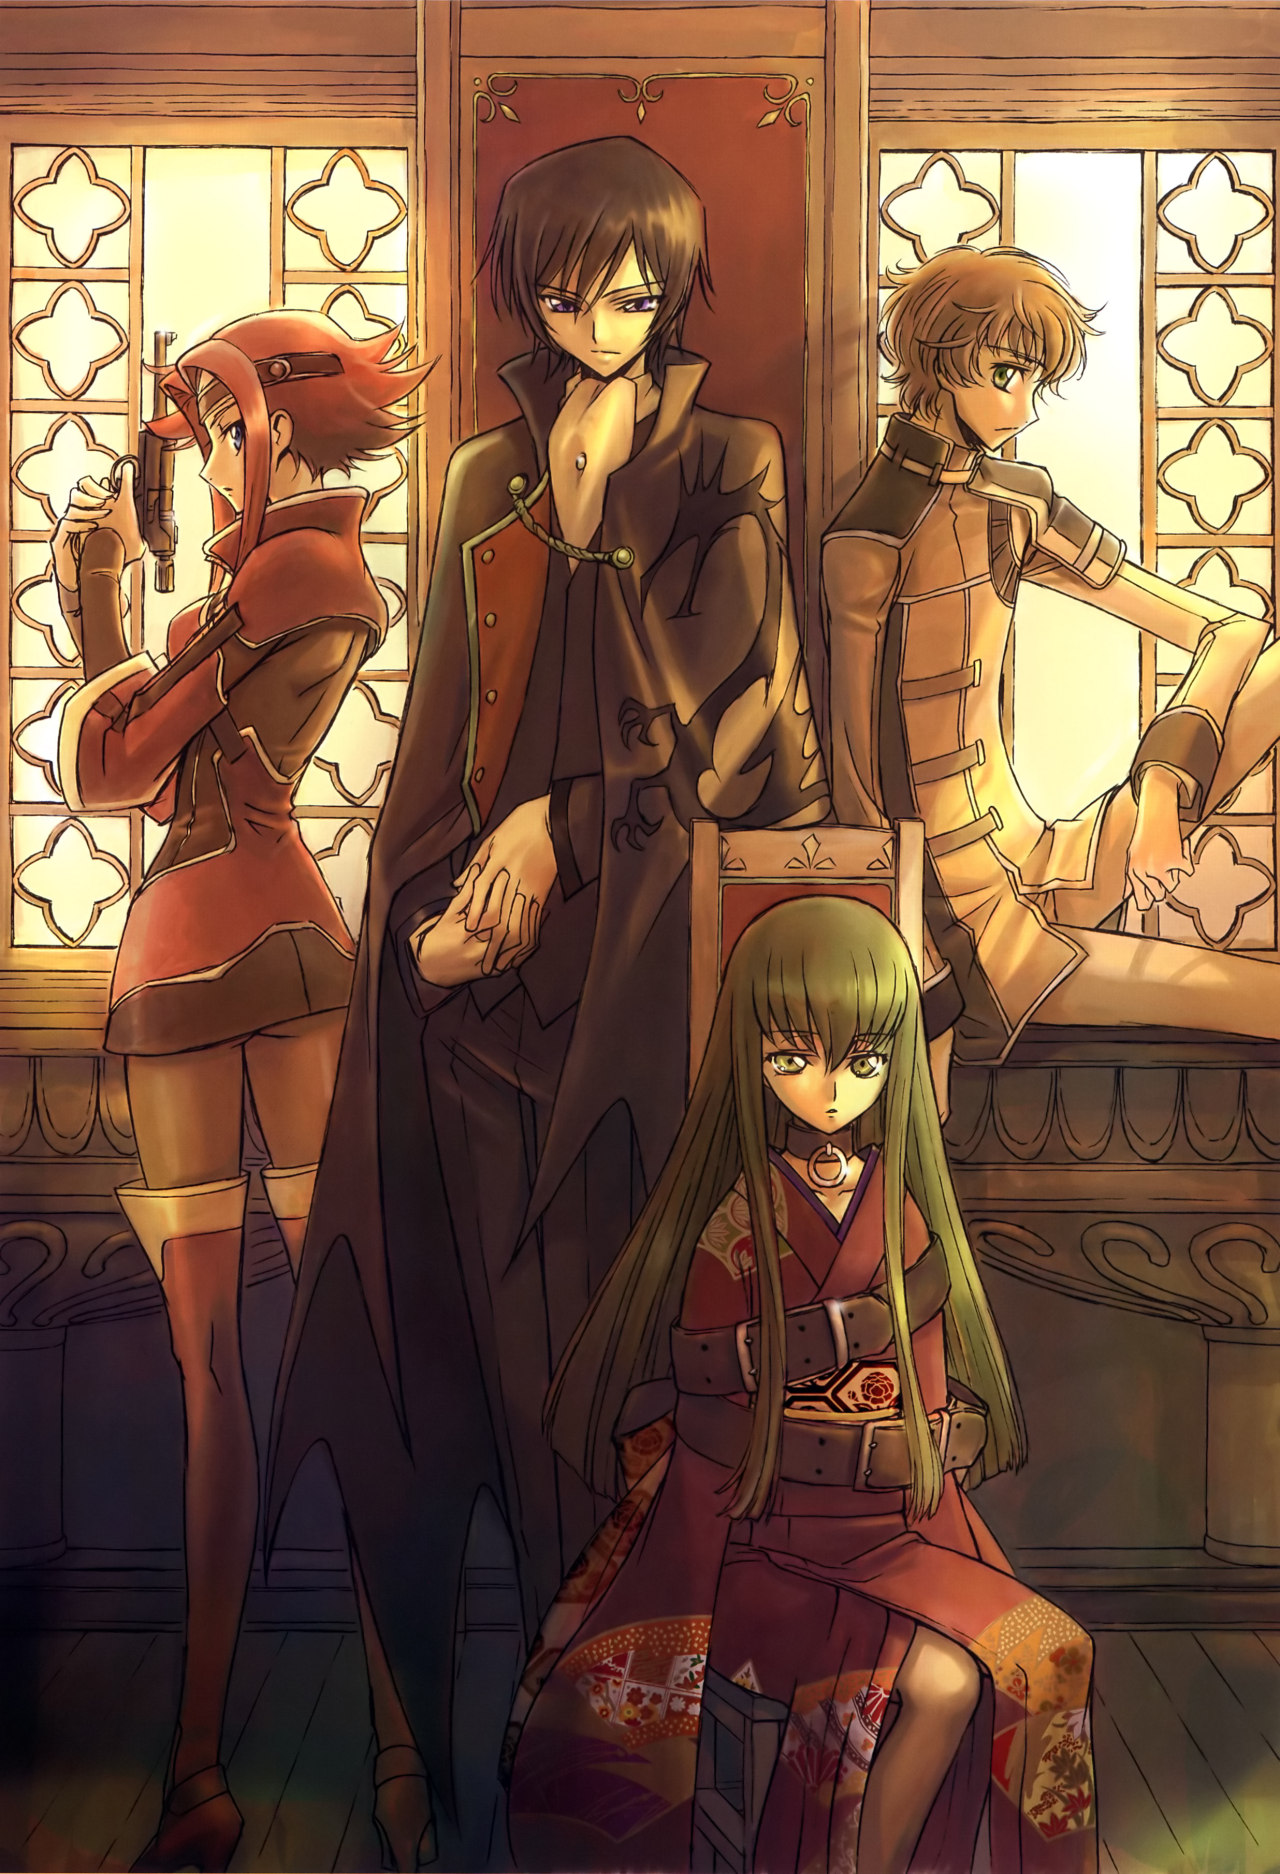 CODE GEASS: Lelouch of the Re;surrection U.S. Premiere - The Kitsune Network